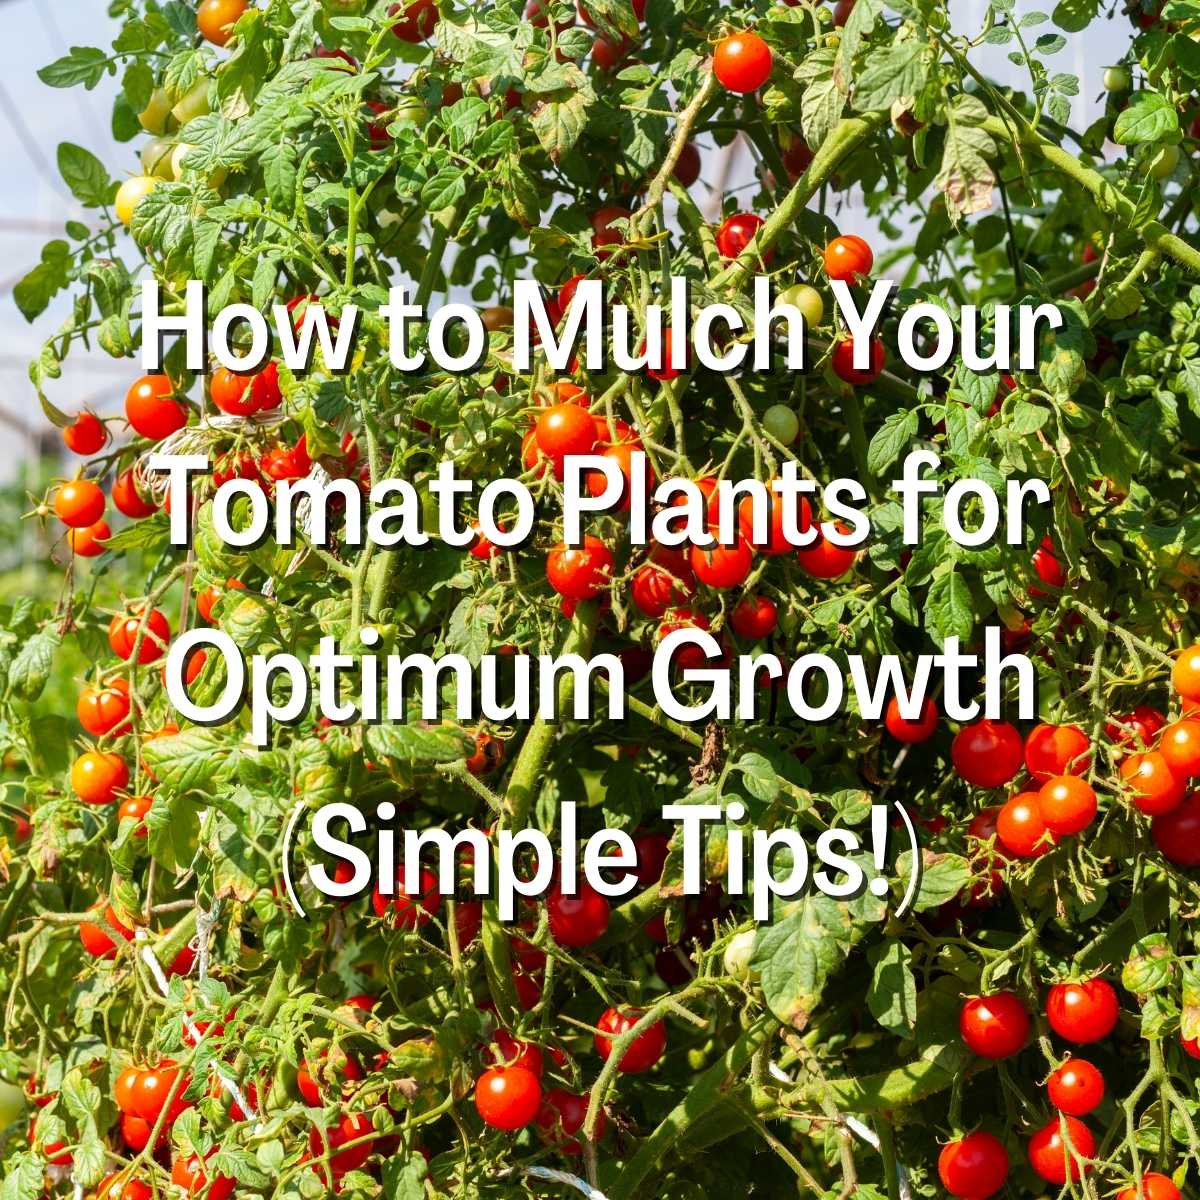 Mulch Your Tomato Plants for Optimum Growth